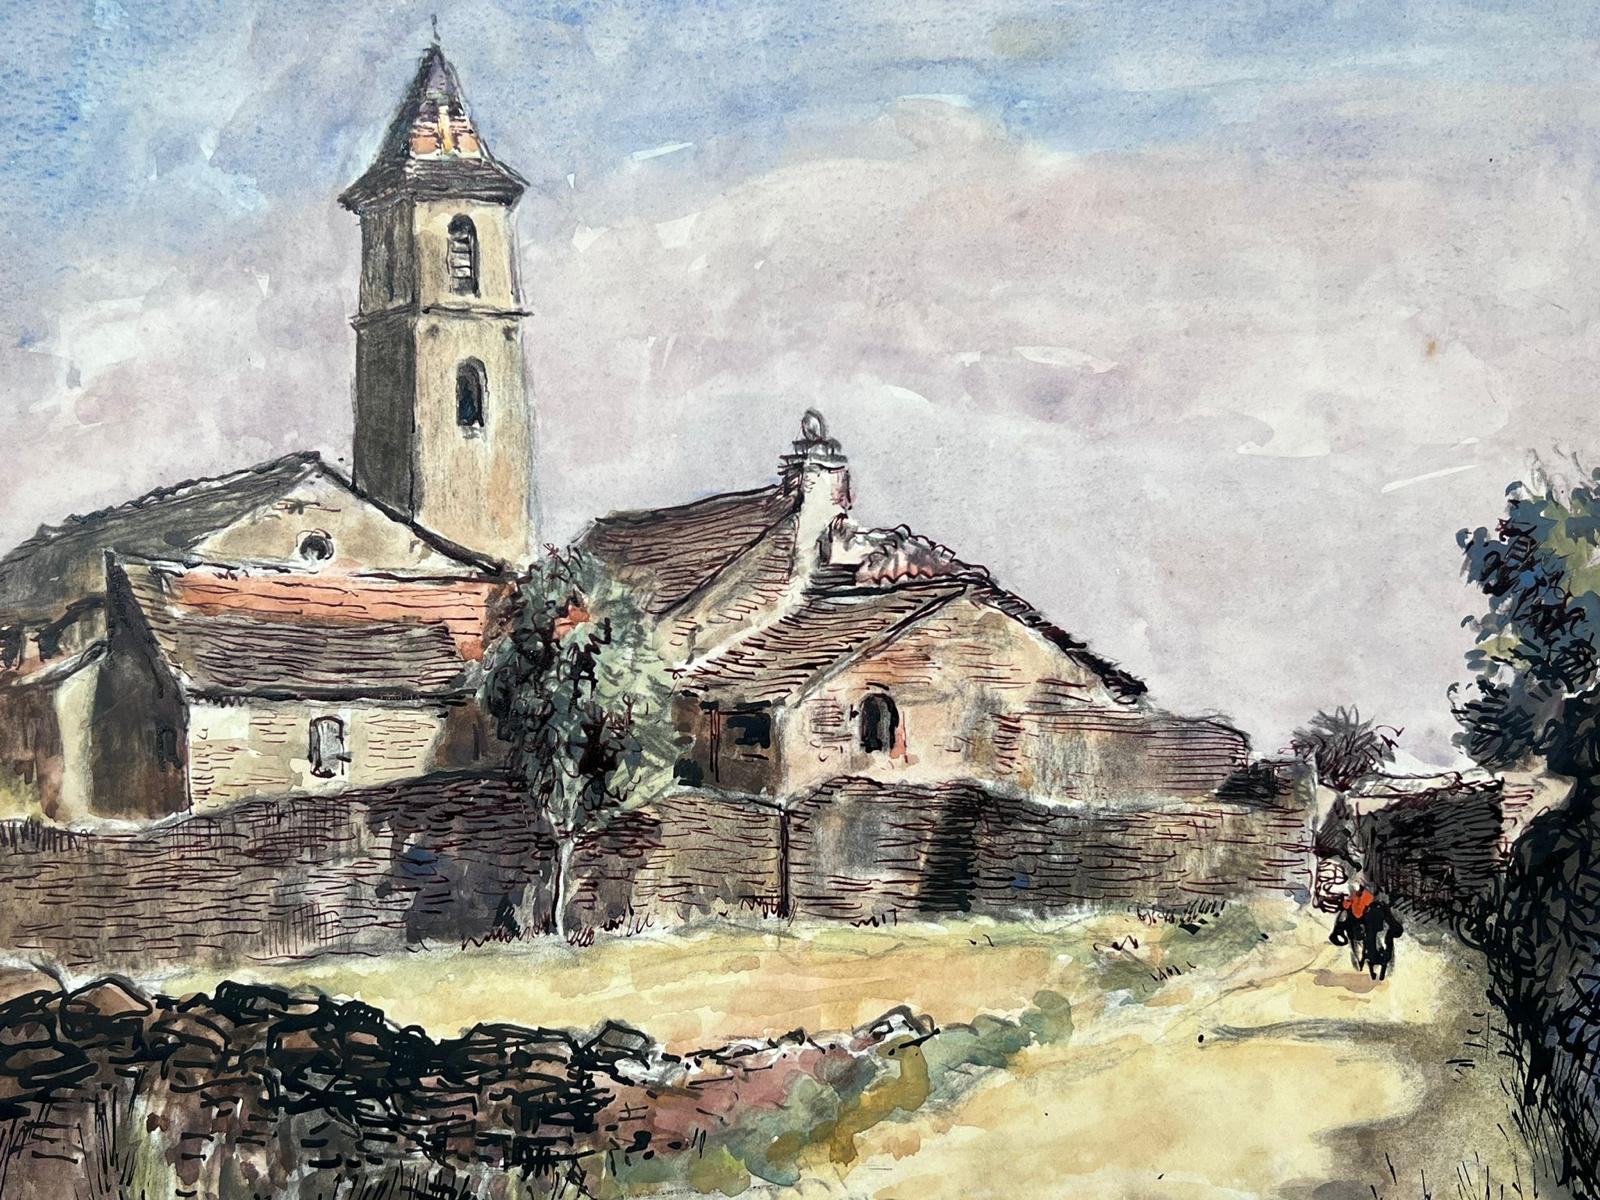 The Old Church
Jean La Forgue (French 1901-1975) signed watercolour and ink on paper, unframed
painting: 12.5 x 16.5 inches
provenance: the artists estate, France
condition: very good and sound condition; there are minor age related marks and stains